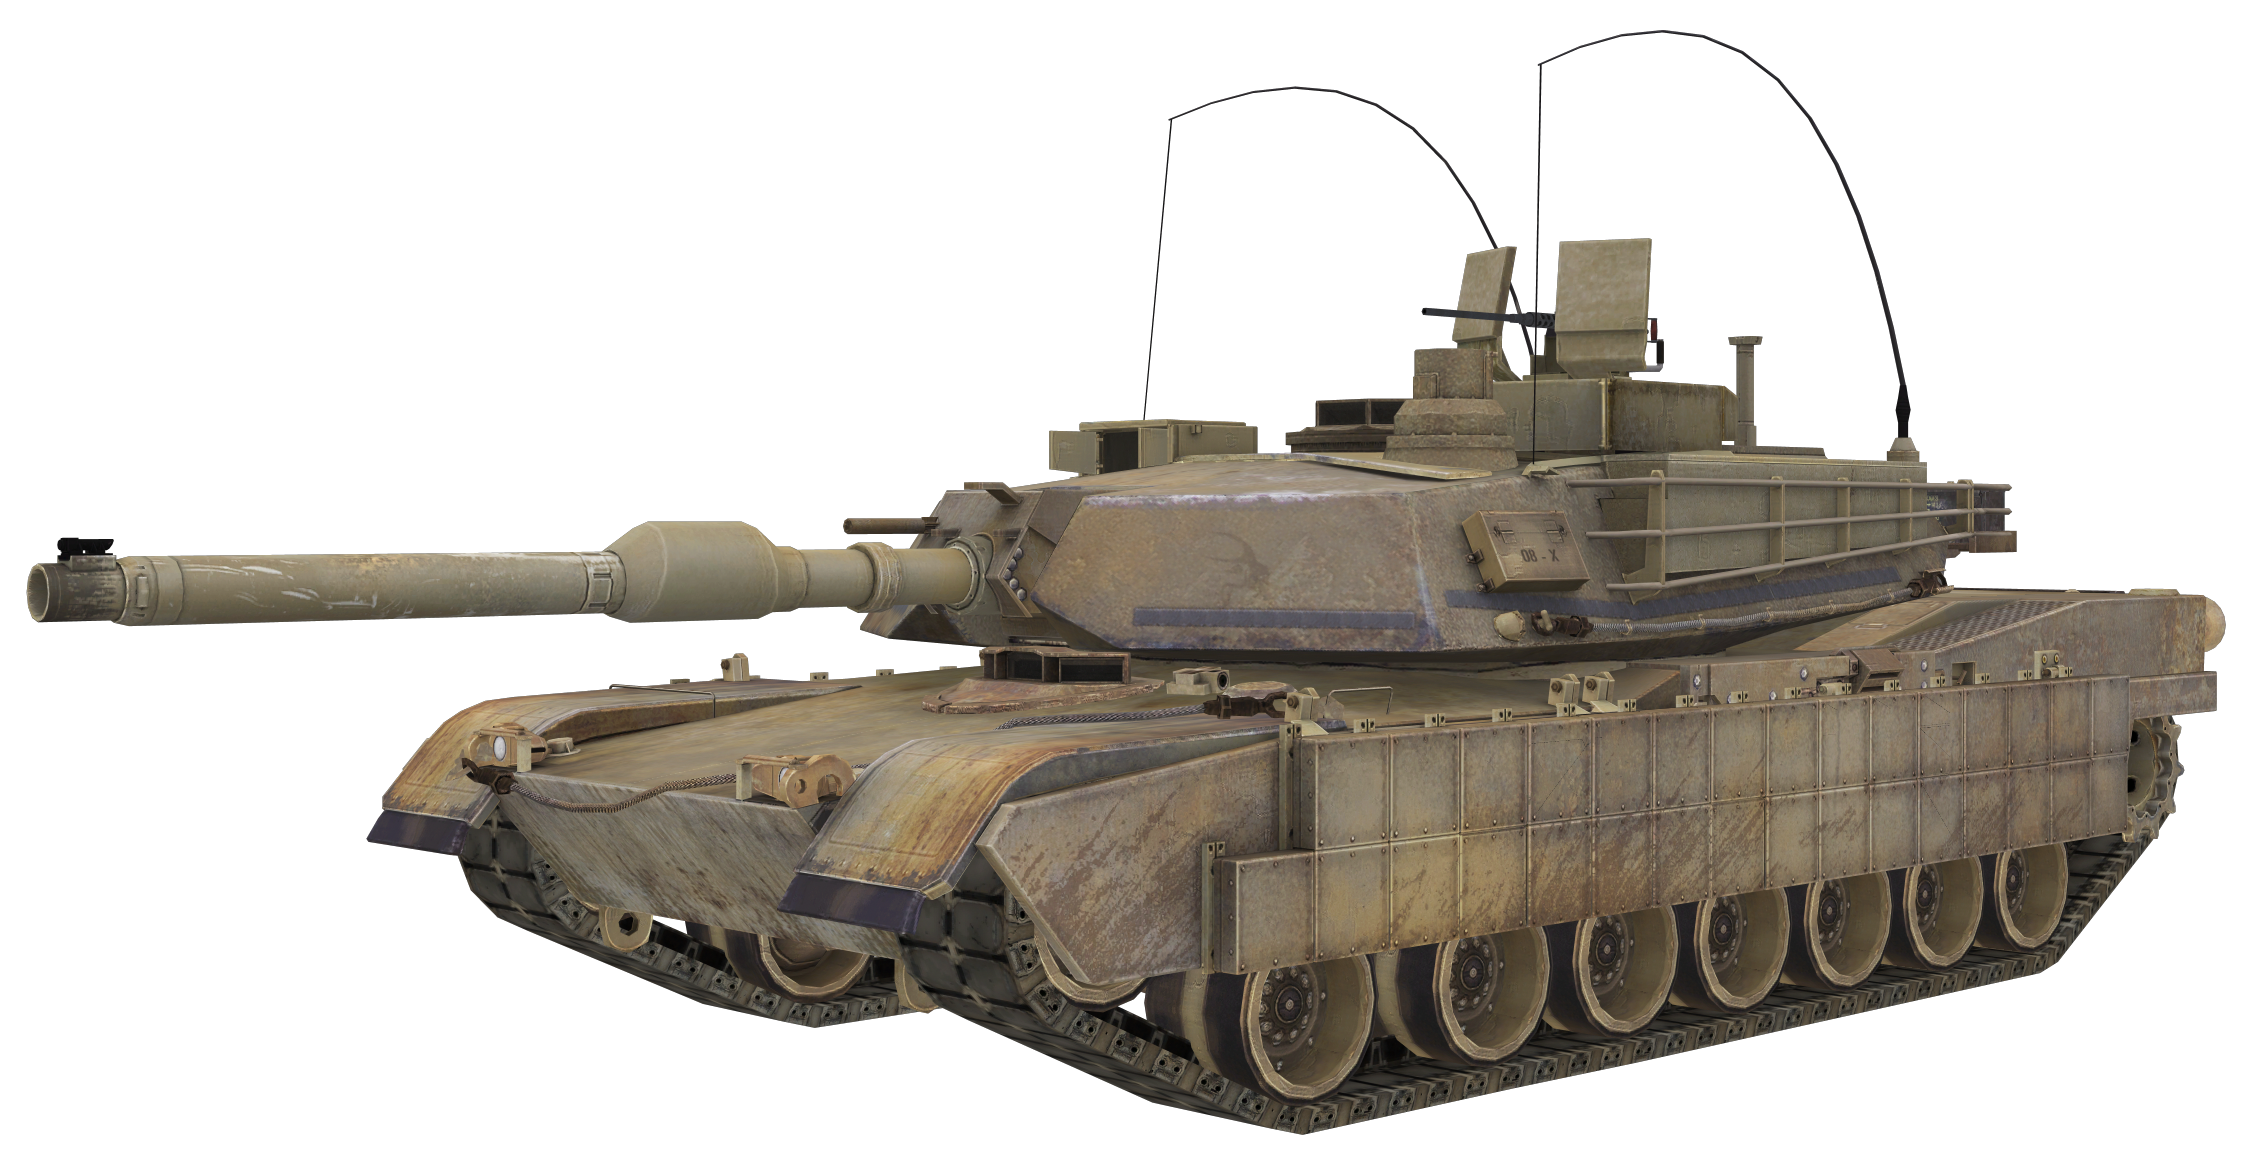 M1A2 Abrams - The Call of Duty Wiki - Black Ops II, Ghosts, and more!